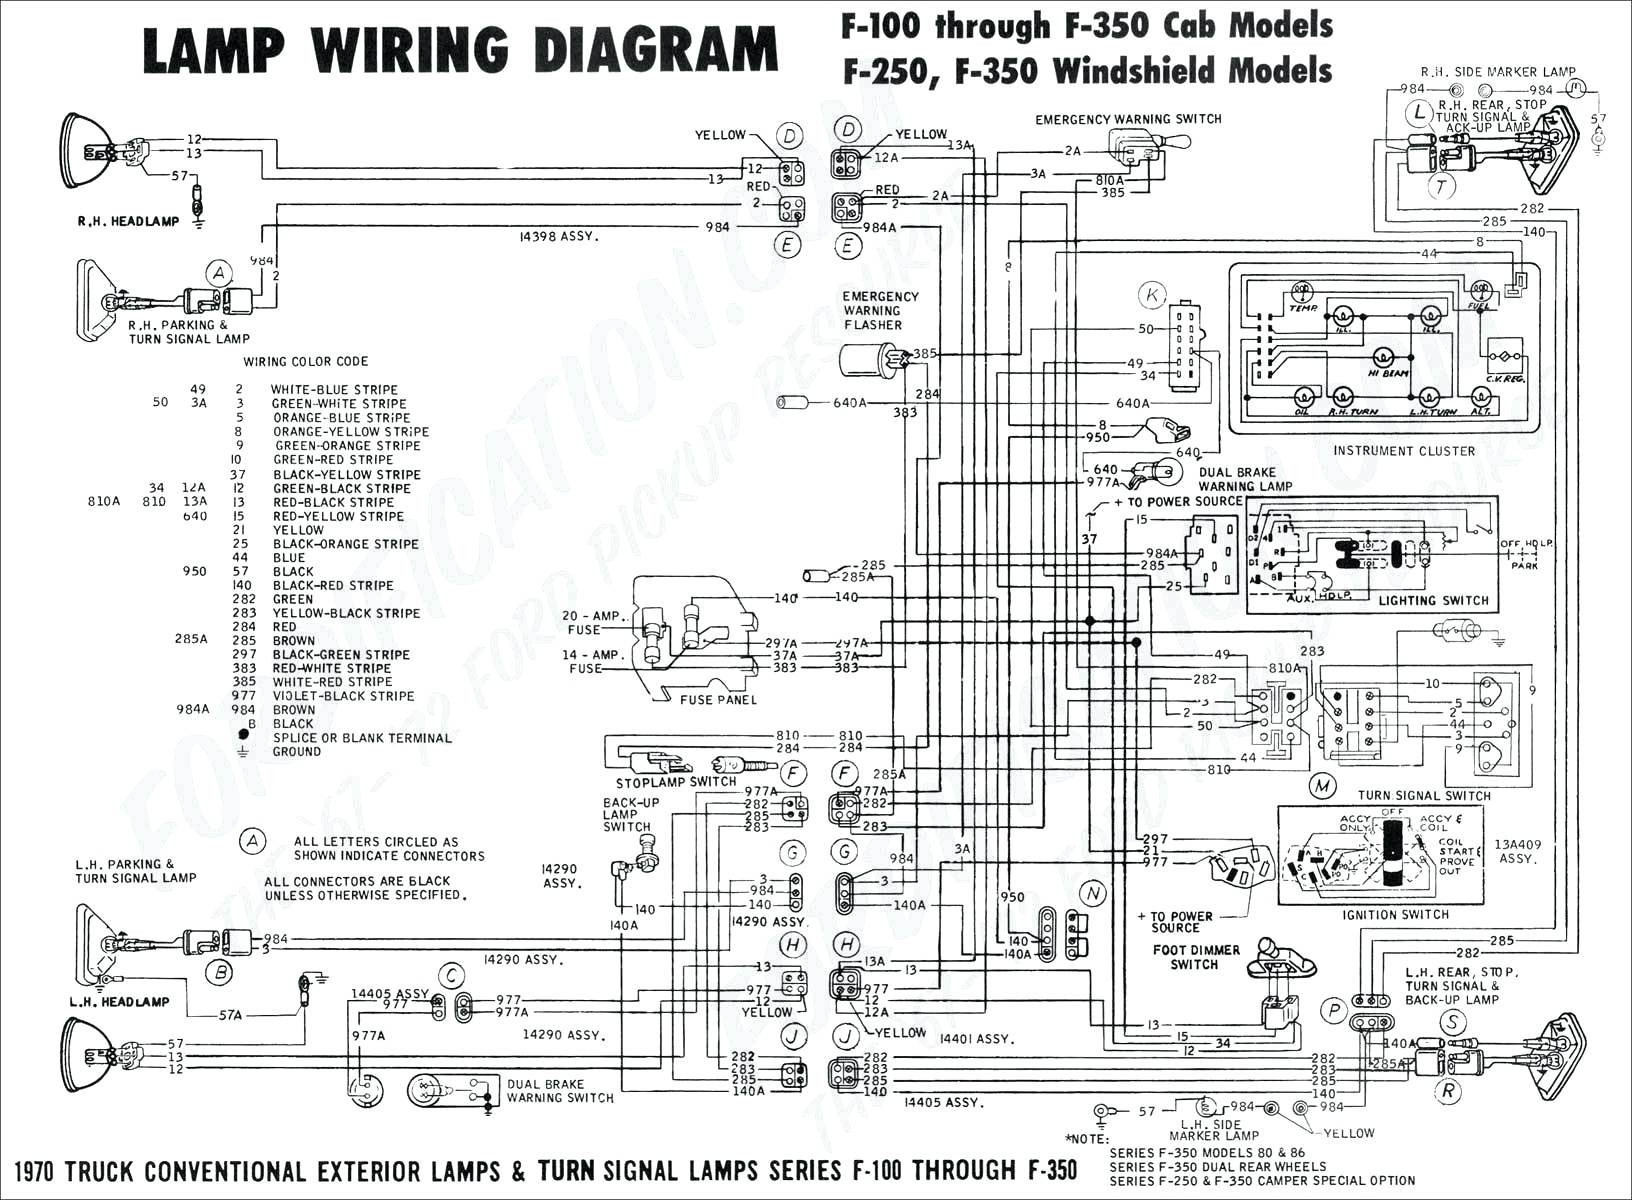 Get 2001 Ford F250 Trailer Wiring Diagram Sample - Chevy Silverado Trailer Wiring Diagram